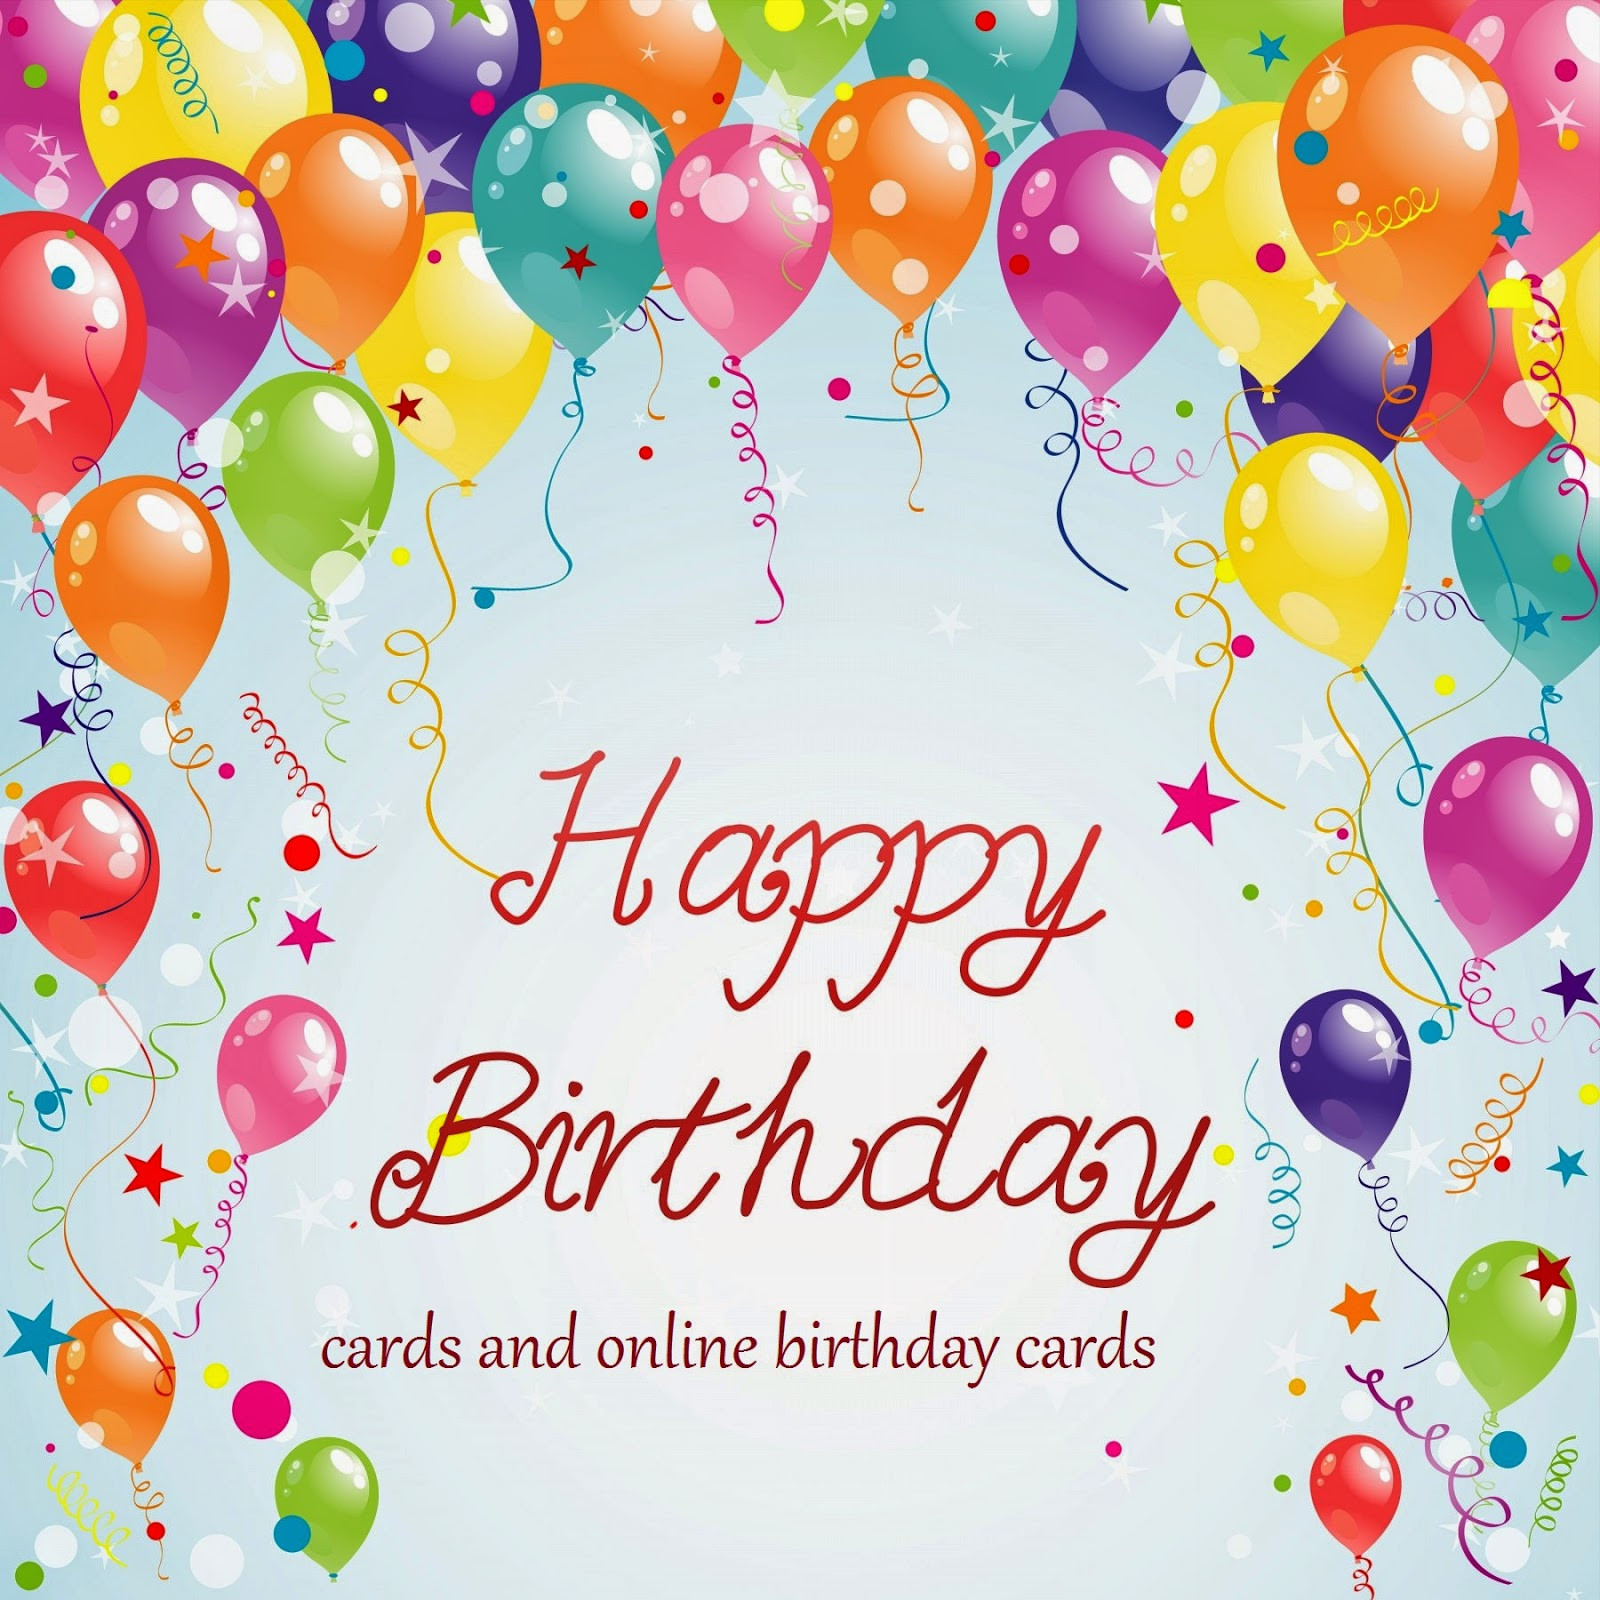 Free Online Birthday Card
 Happy birthday cards free [birthday cards] and e